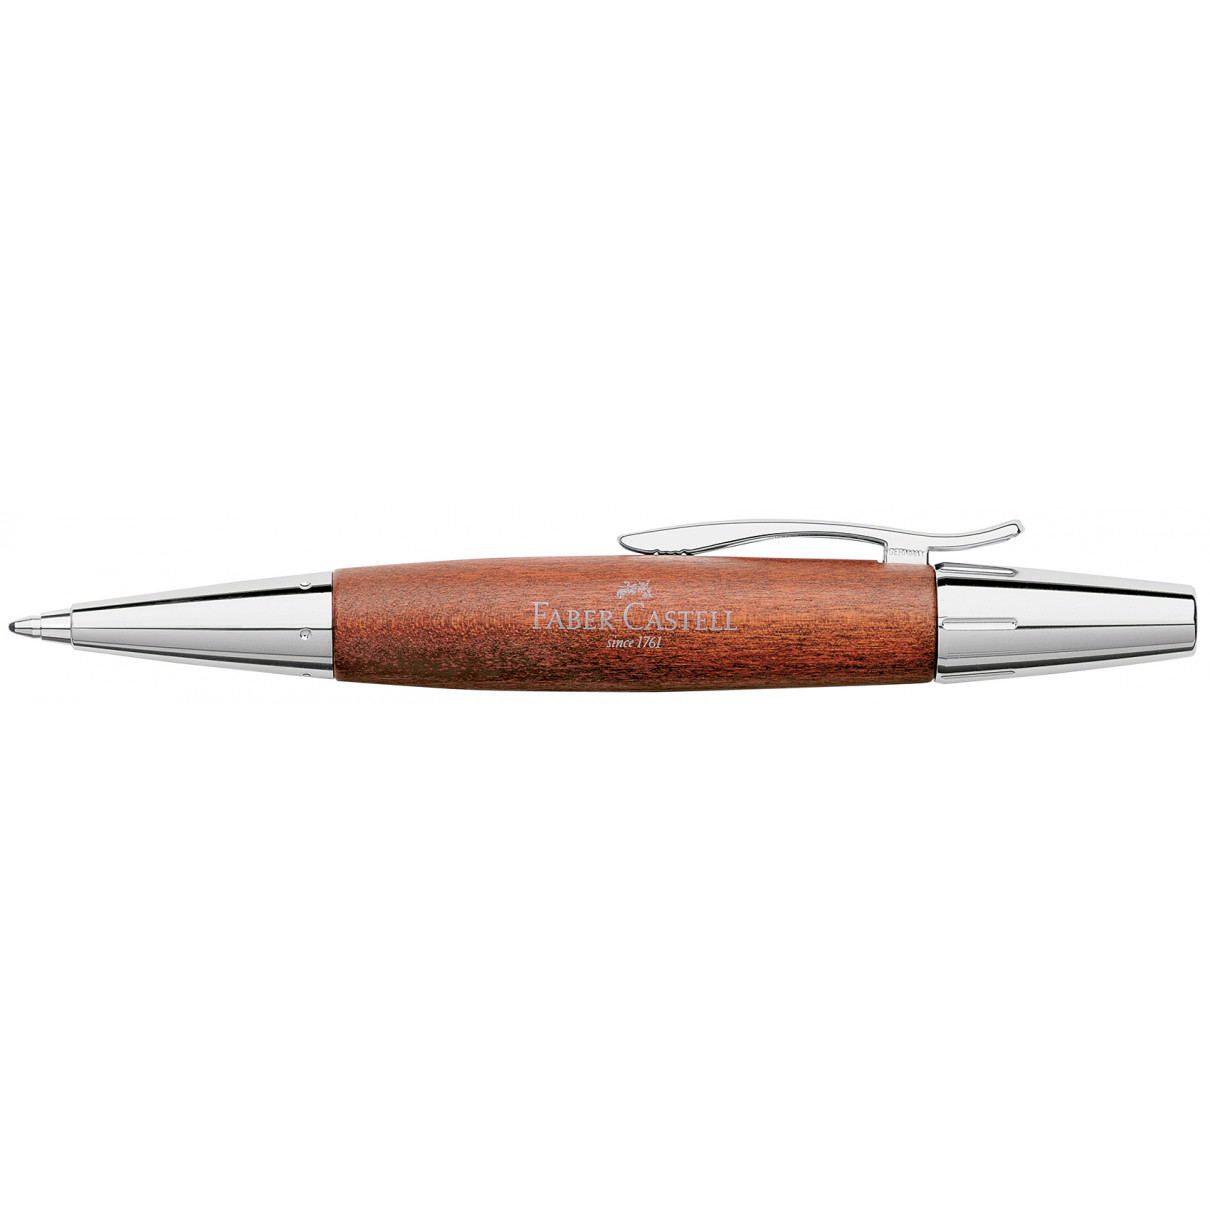 Faber-Castell e-motion Ballpoint Pen - Brown Wood and Chrome